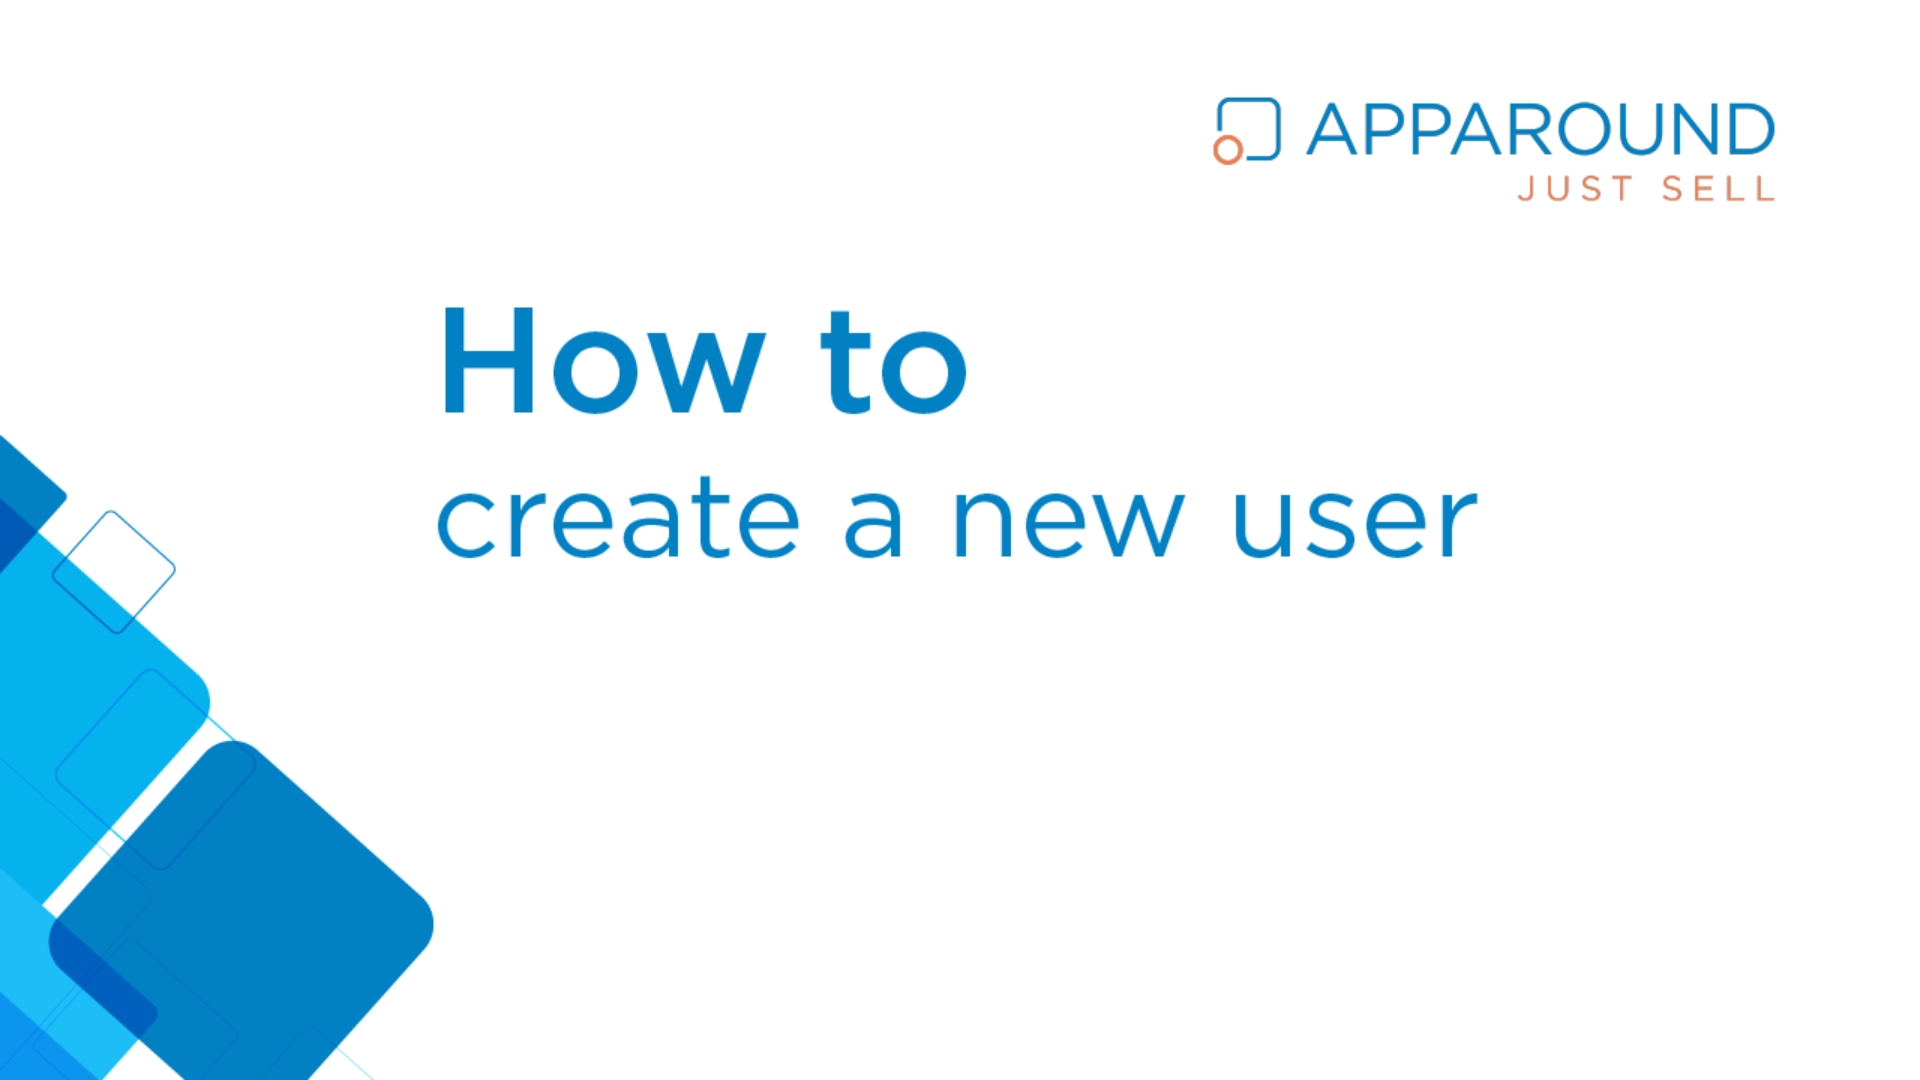 Apparound_Video_HowTo_Create_A_New_User